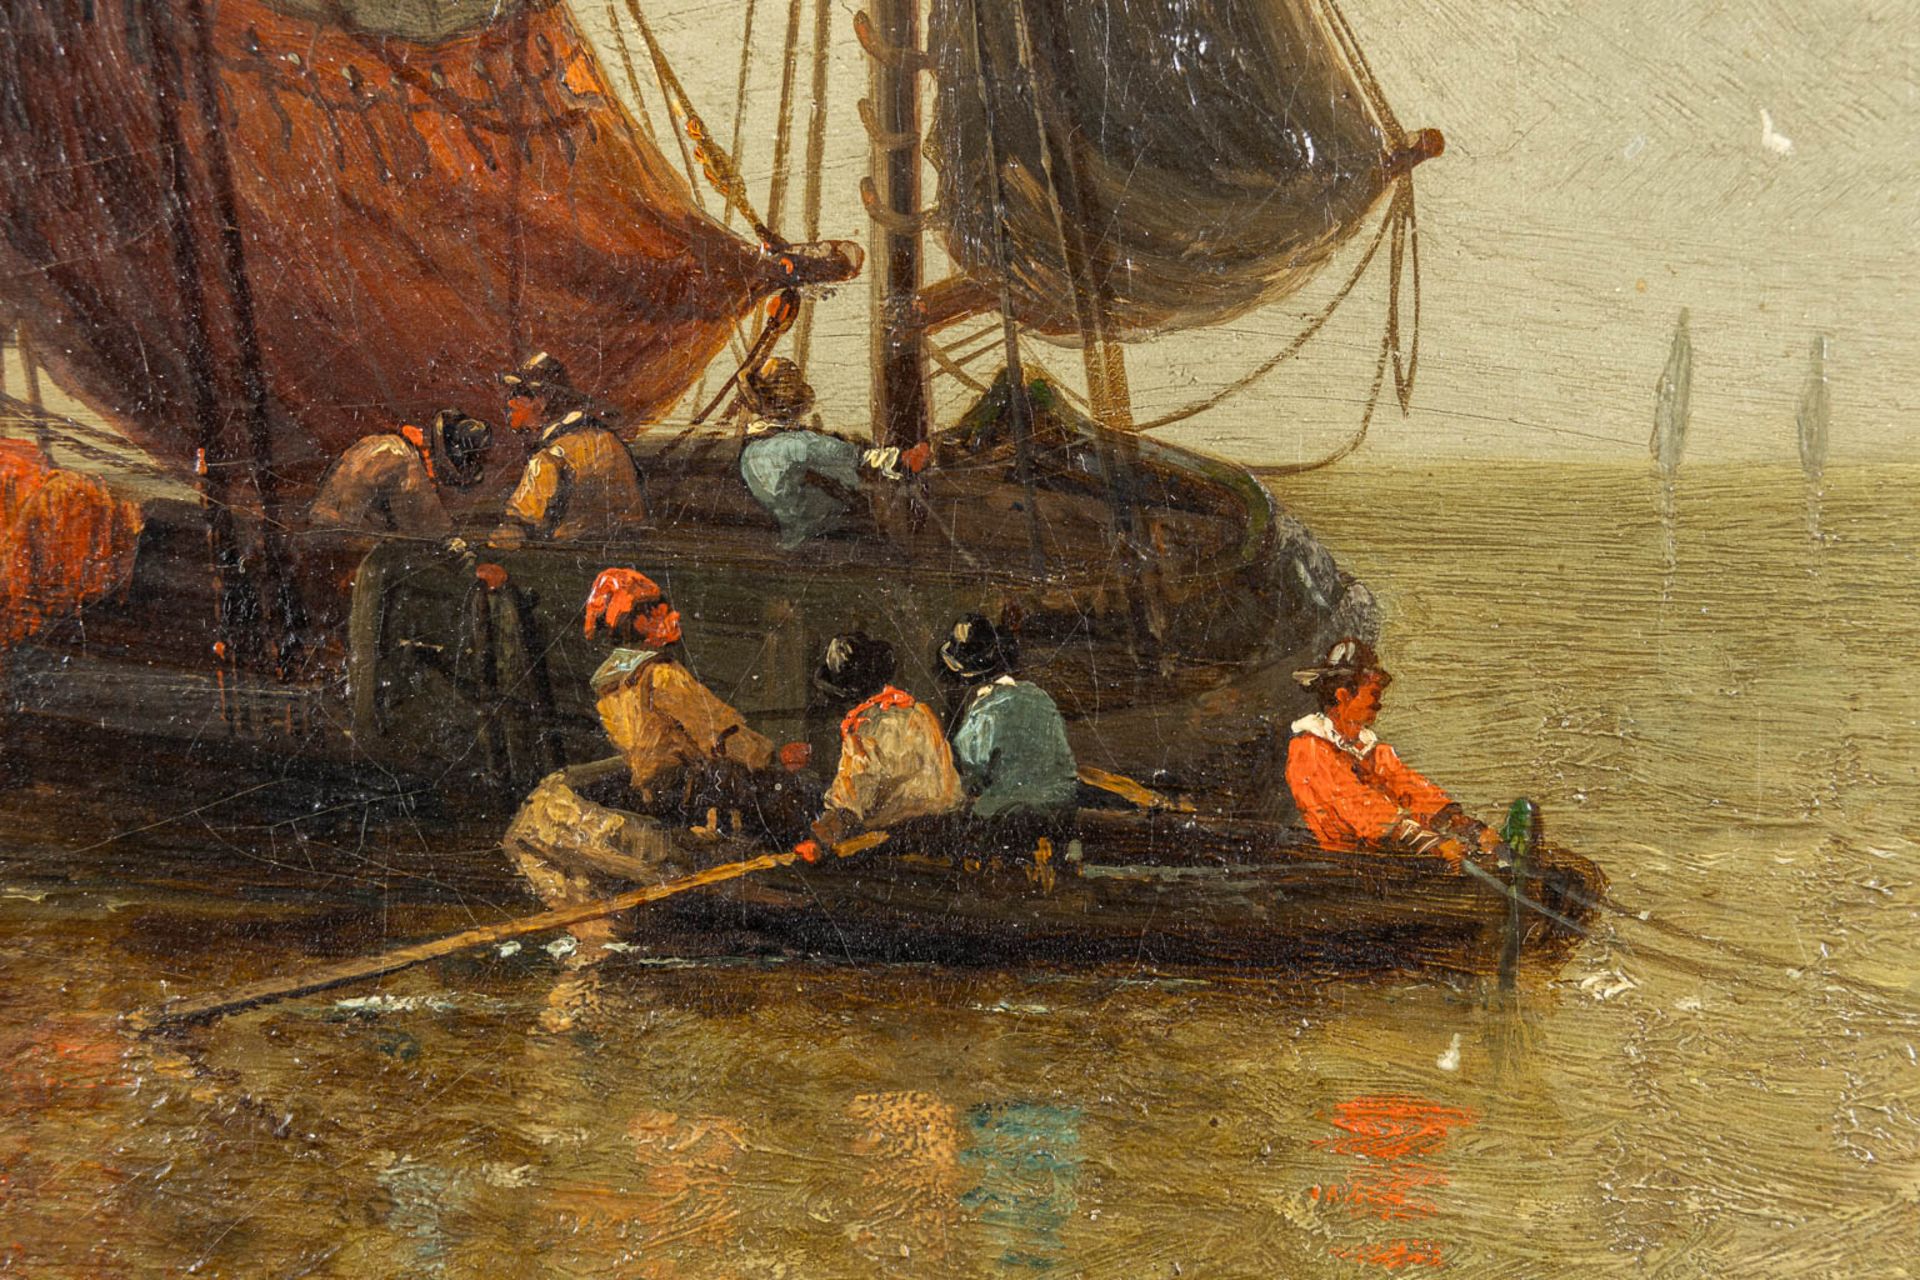 Louis TIMMERMANS (1846-1910) 'Marine' oil on canvas. (W:76 x H:51 cm) - Image 6 of 9